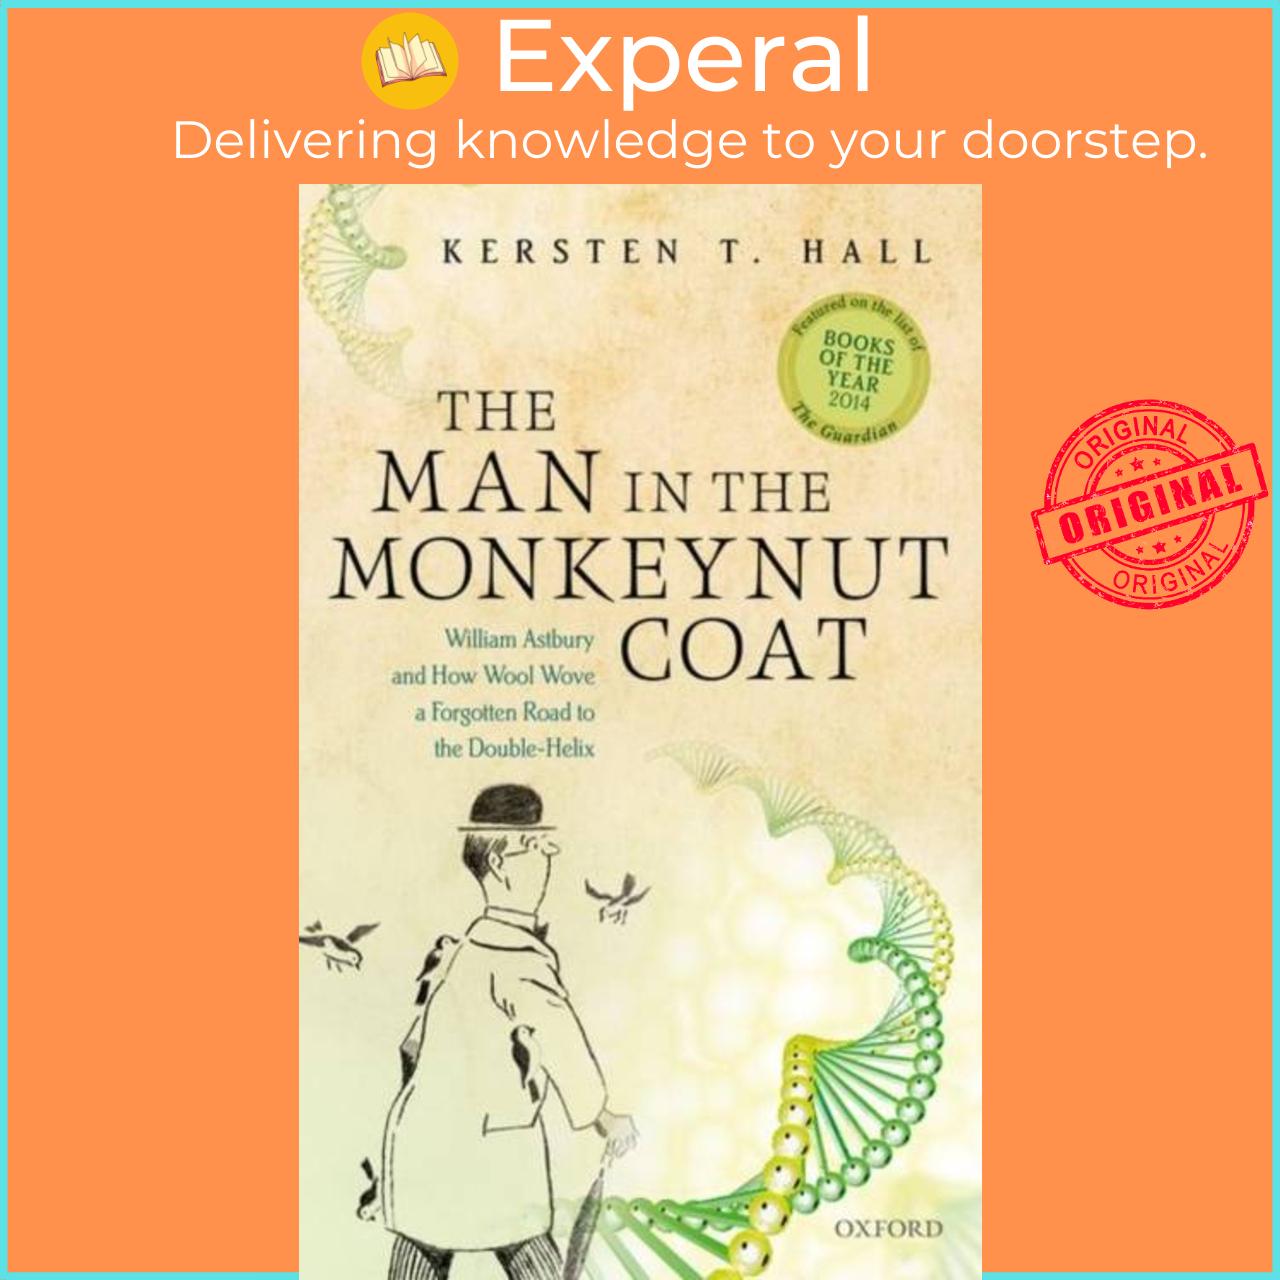 Sách - The Man in the Monkeynut Coat - William Astbury and How Wool Wove a Fo by Kersten T. Hall (UK edition, paperback)